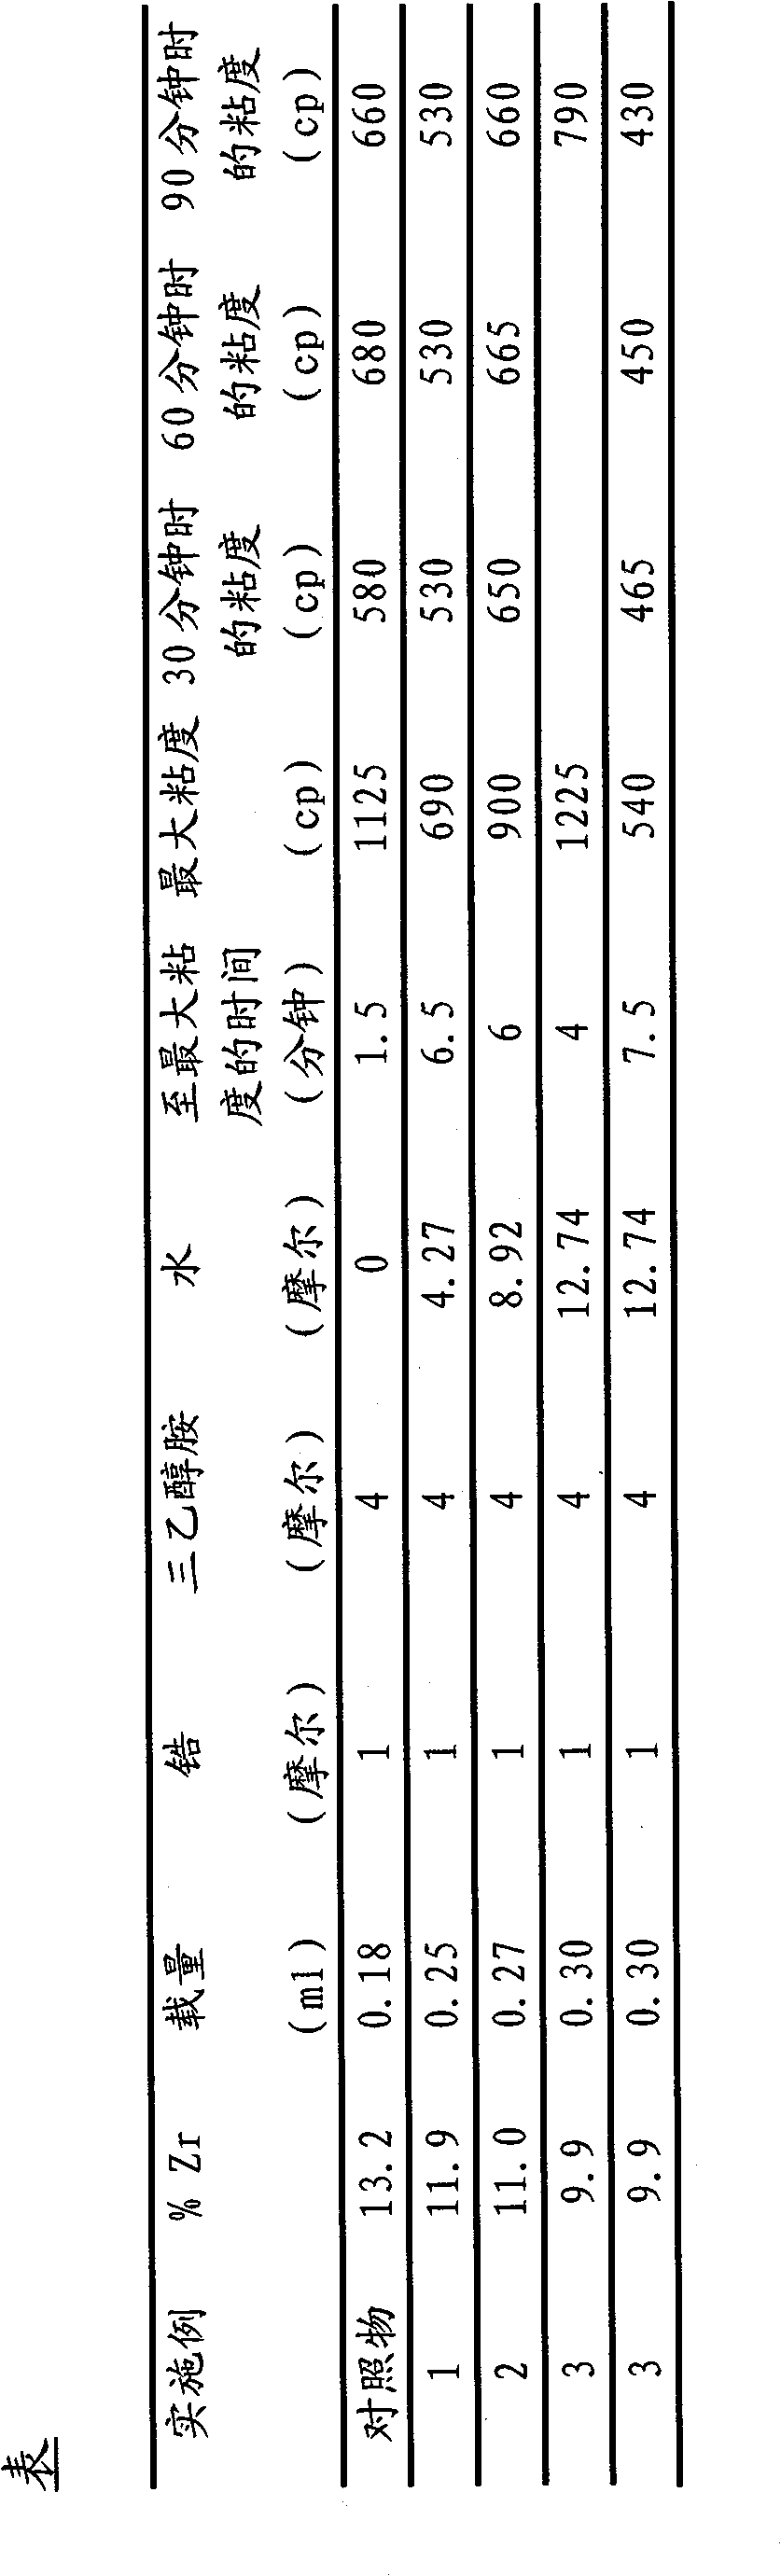 Process for stabilized zirconium triethanolamine complex and uses in oil field applications